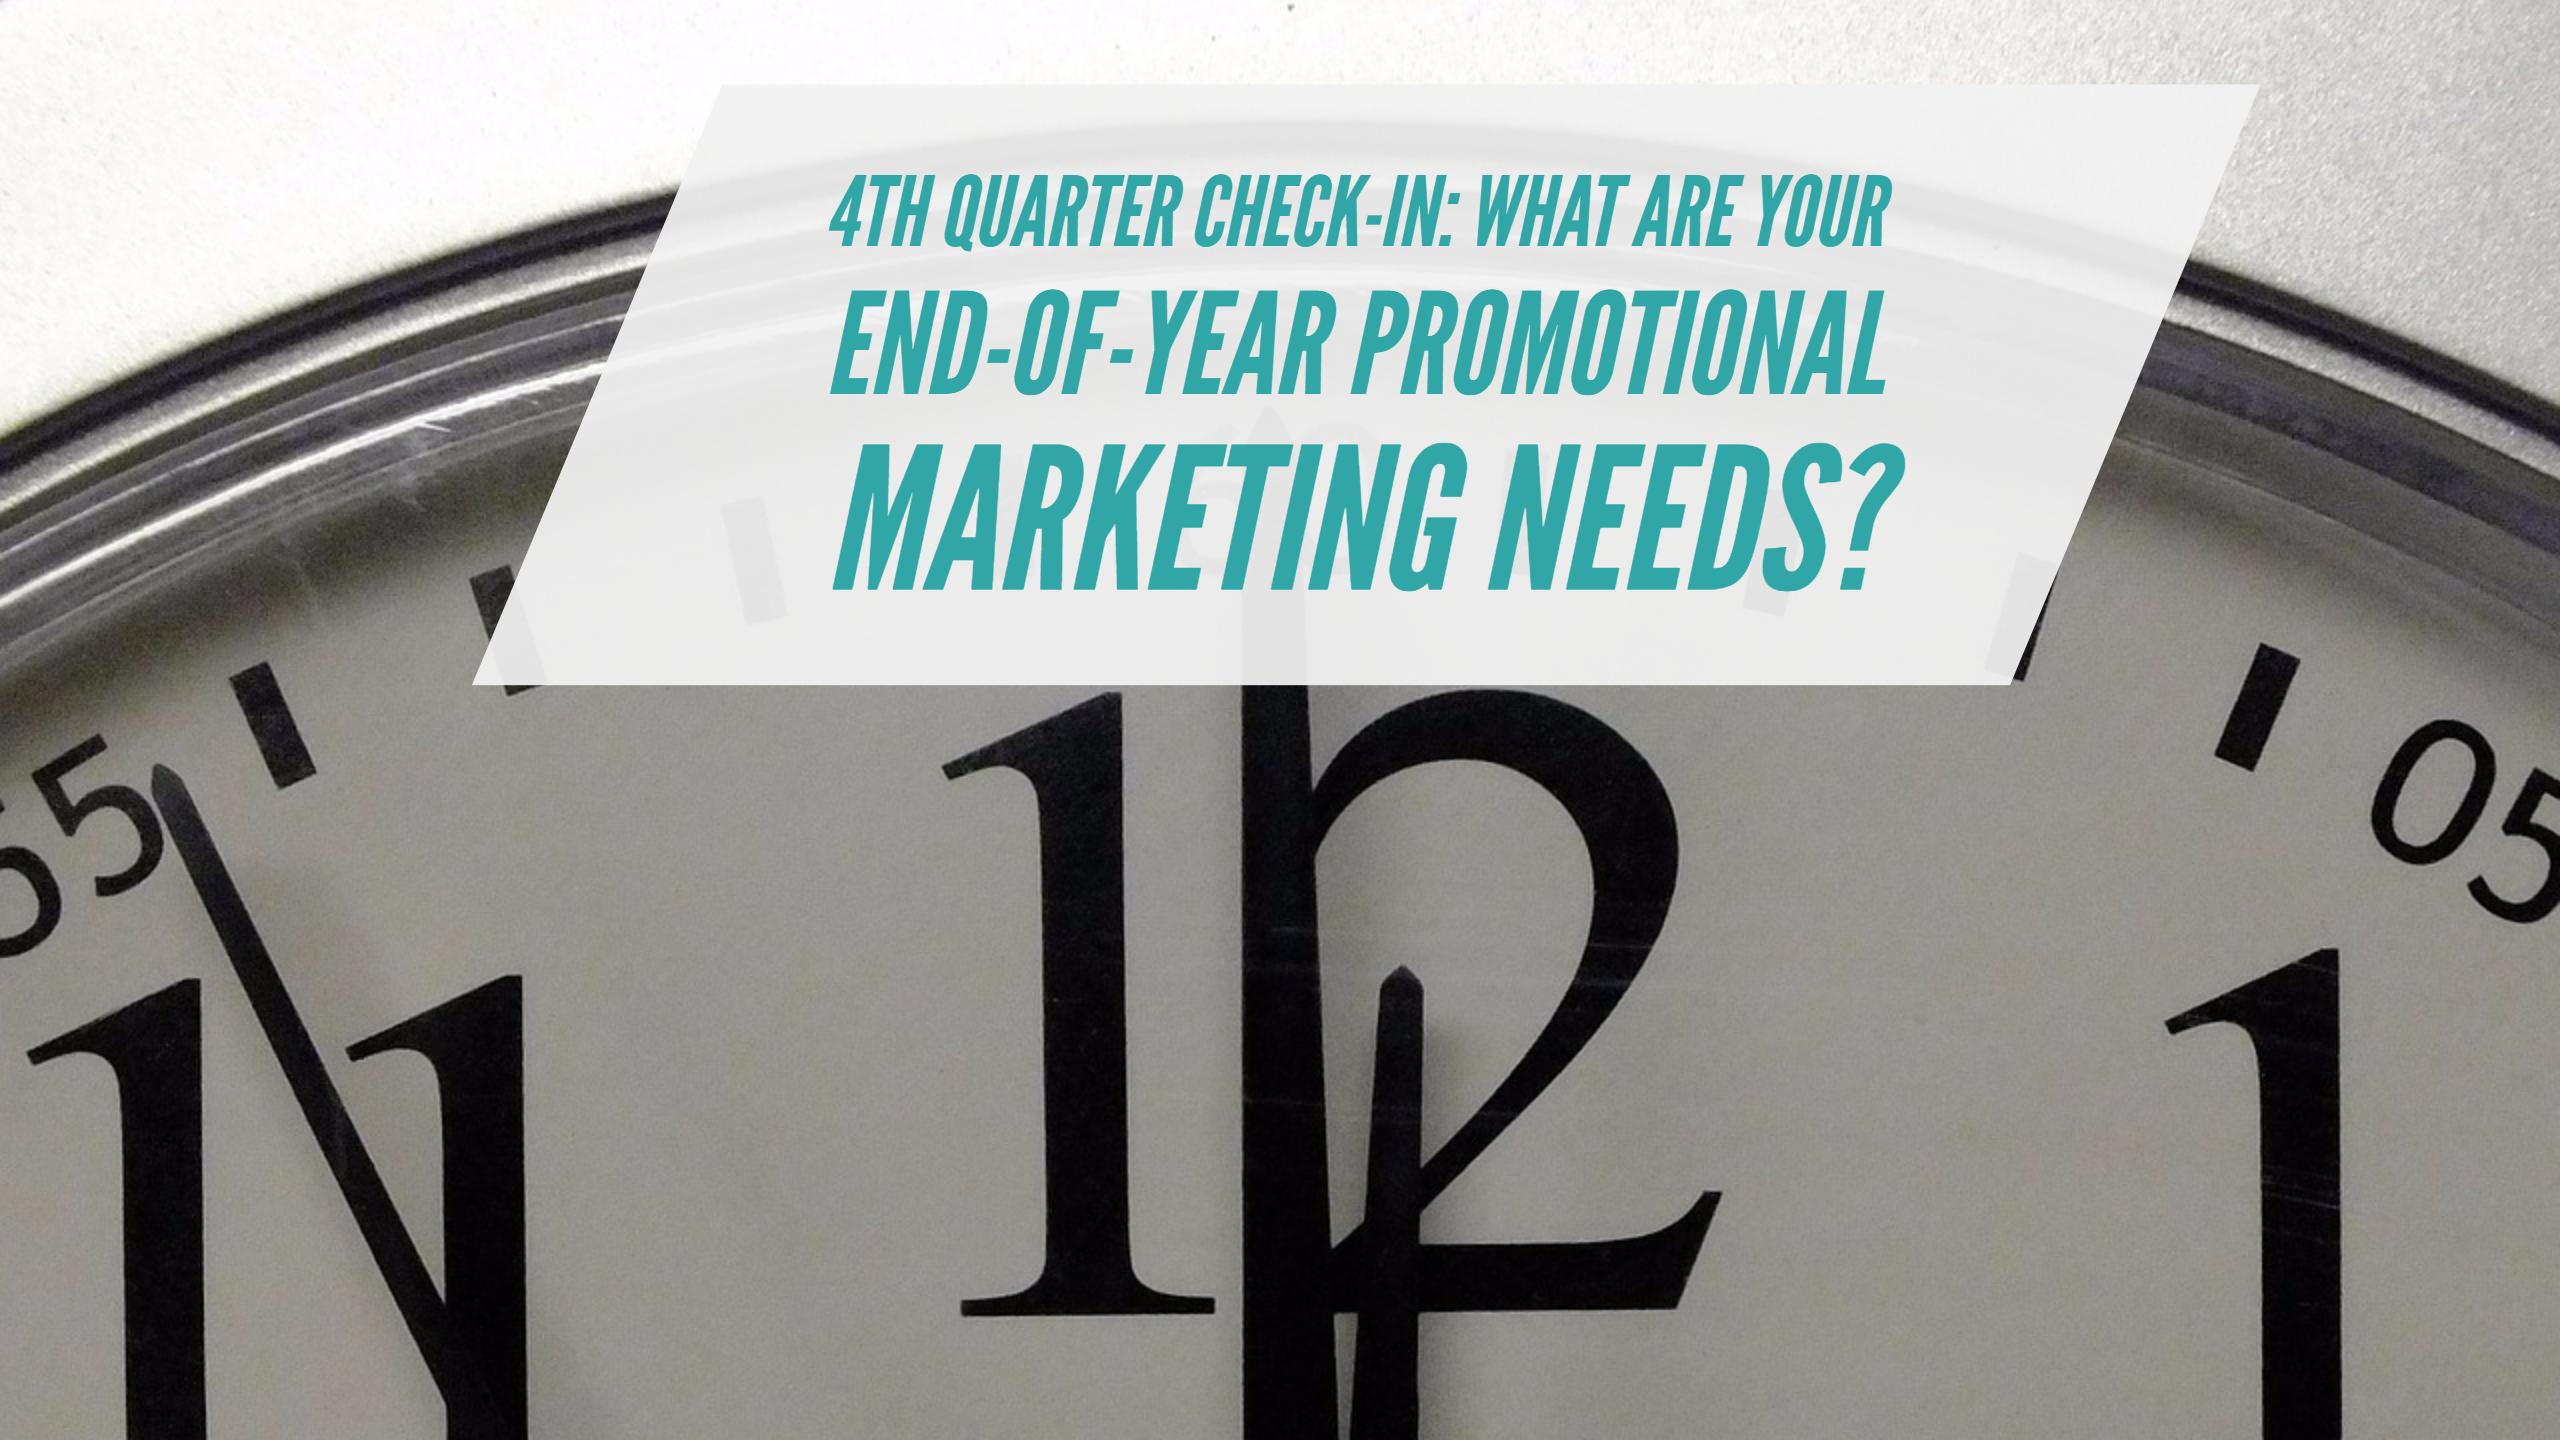 What are your promotional marketing needs?